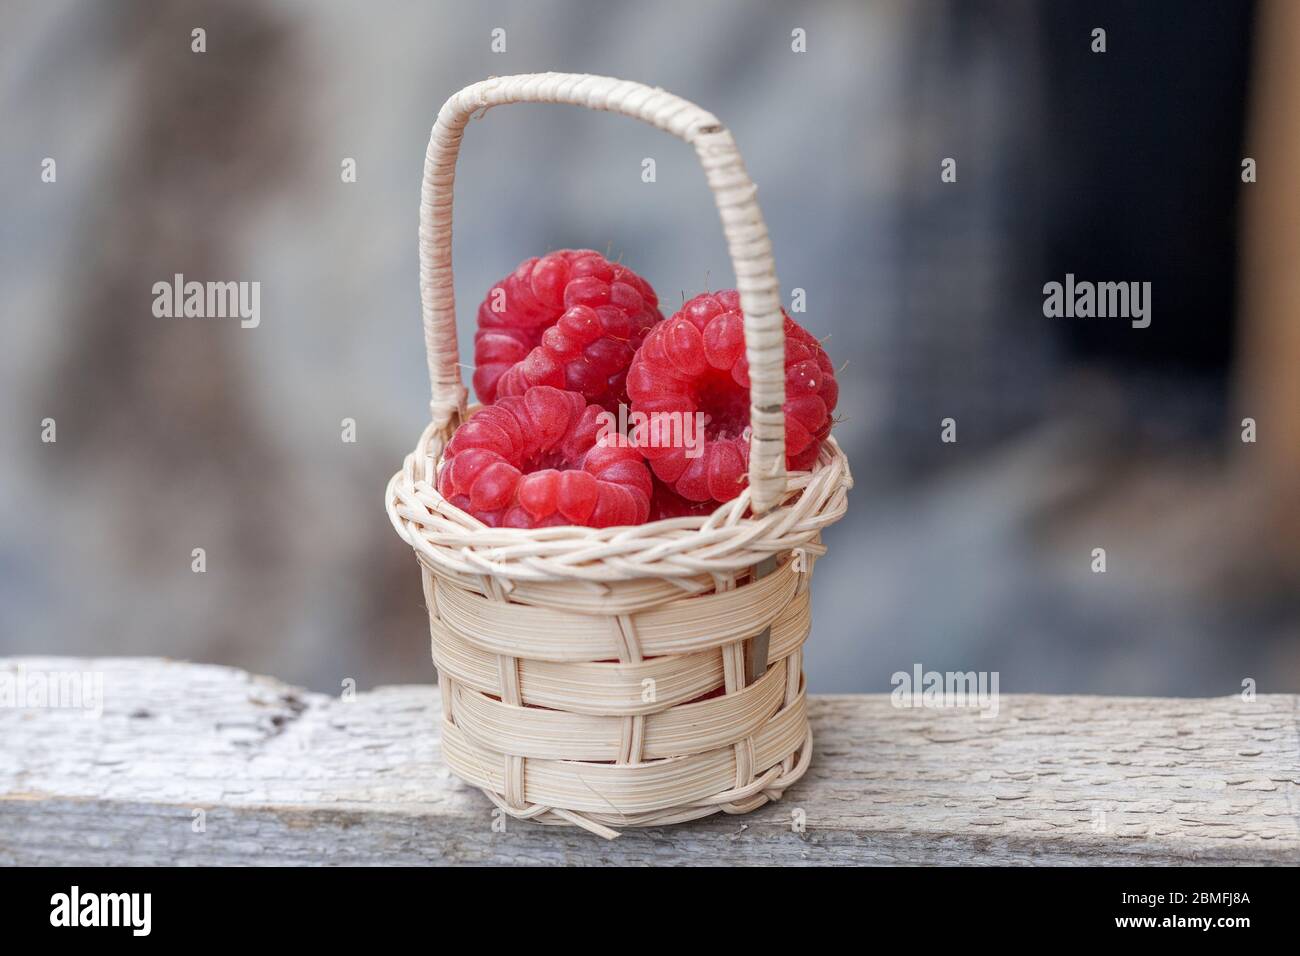 Wicker basket with red raspberries Stock Photo